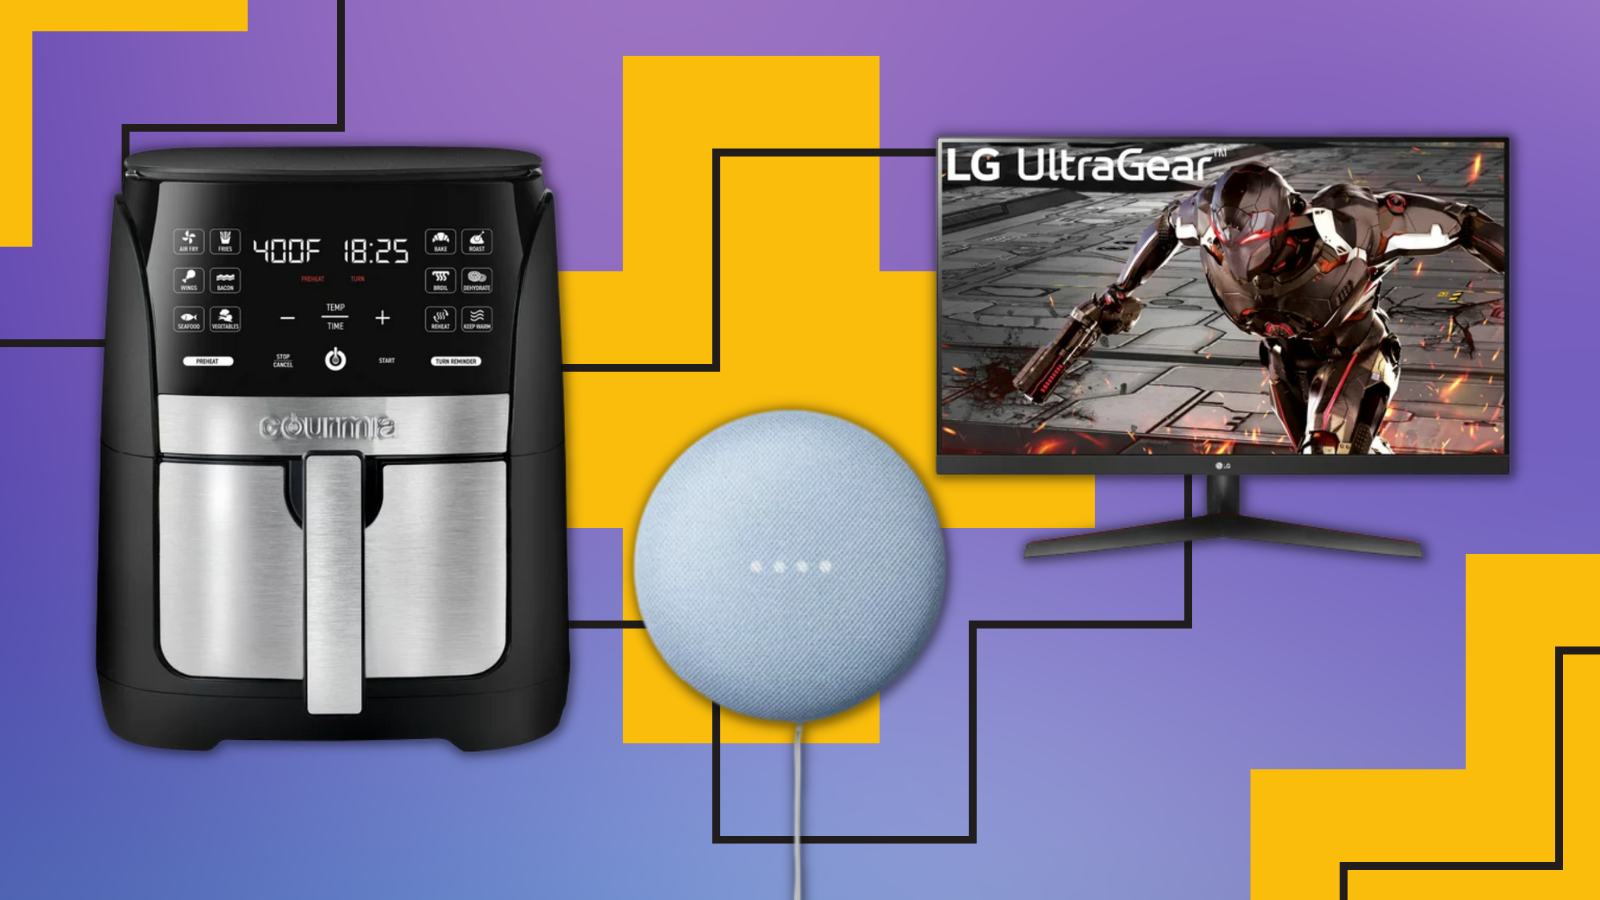 gourmia air fryer, google nest mini, and lg monitor with a purple and yellow background